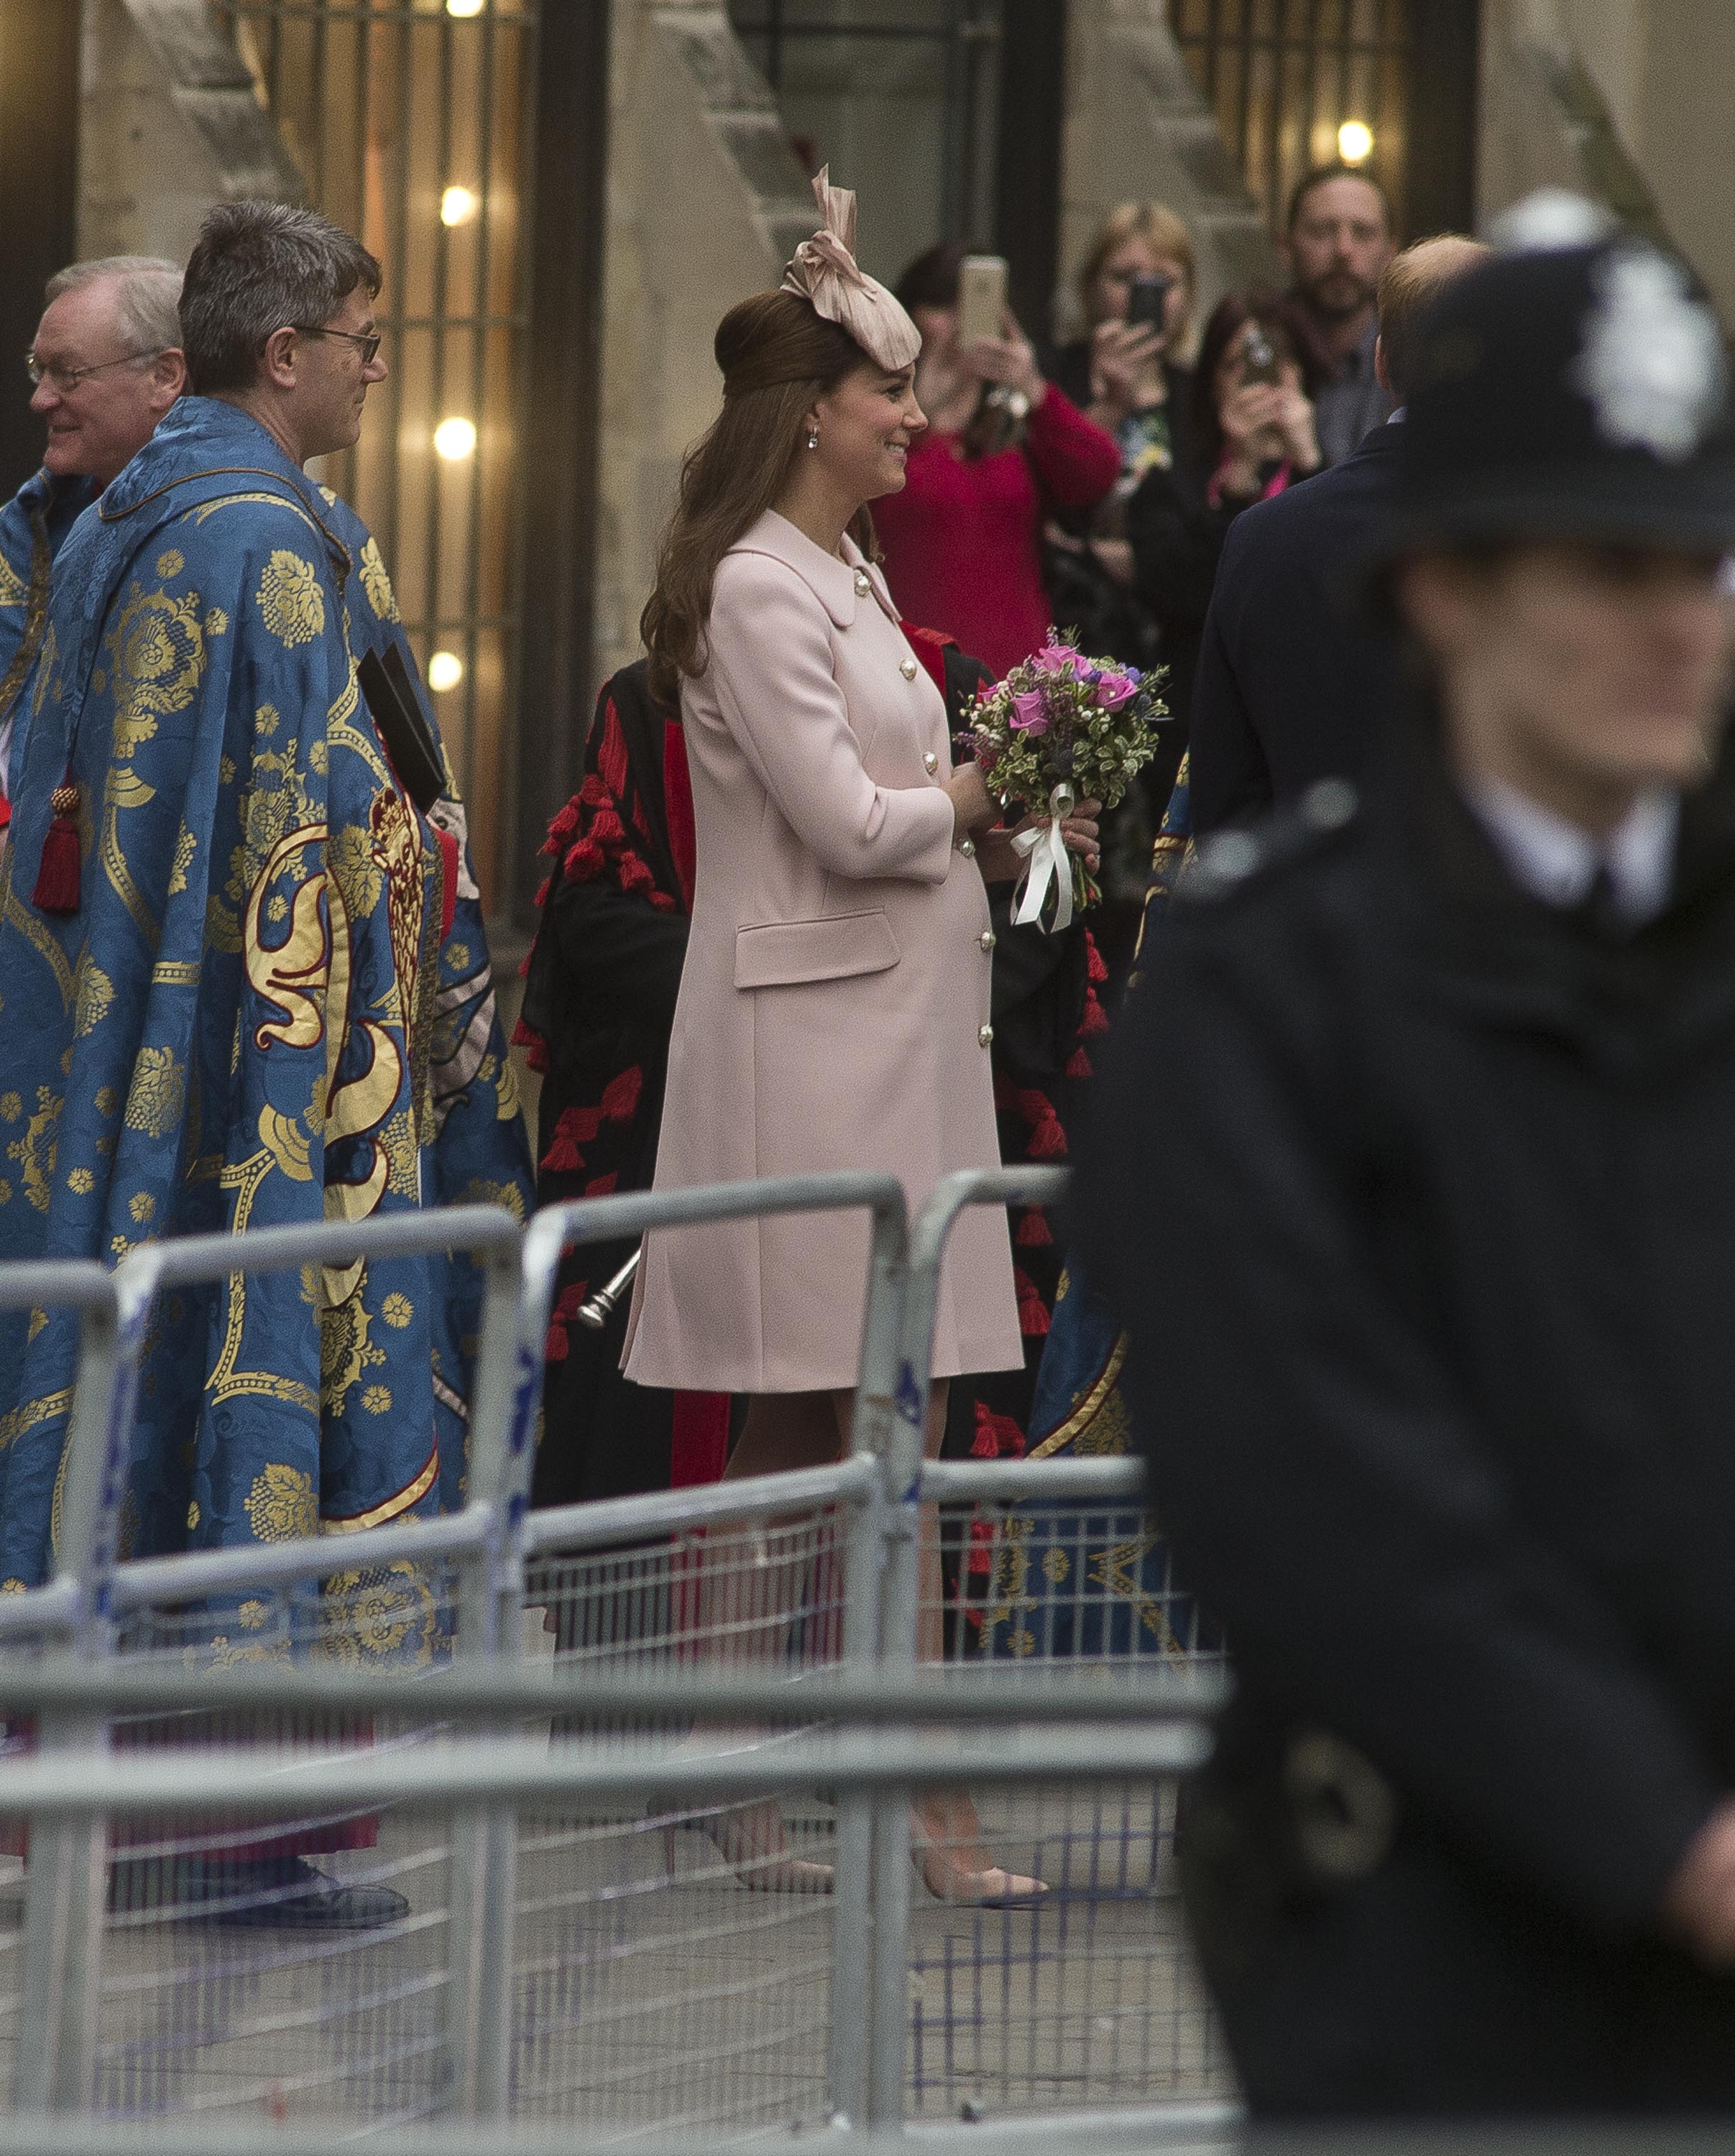 Catherine and Duchess of Cambridge is seen leaving the Commonwealth Service, held at Westminster Abbey on March 9, 2015 in London, England.  |  Source: Getty Images